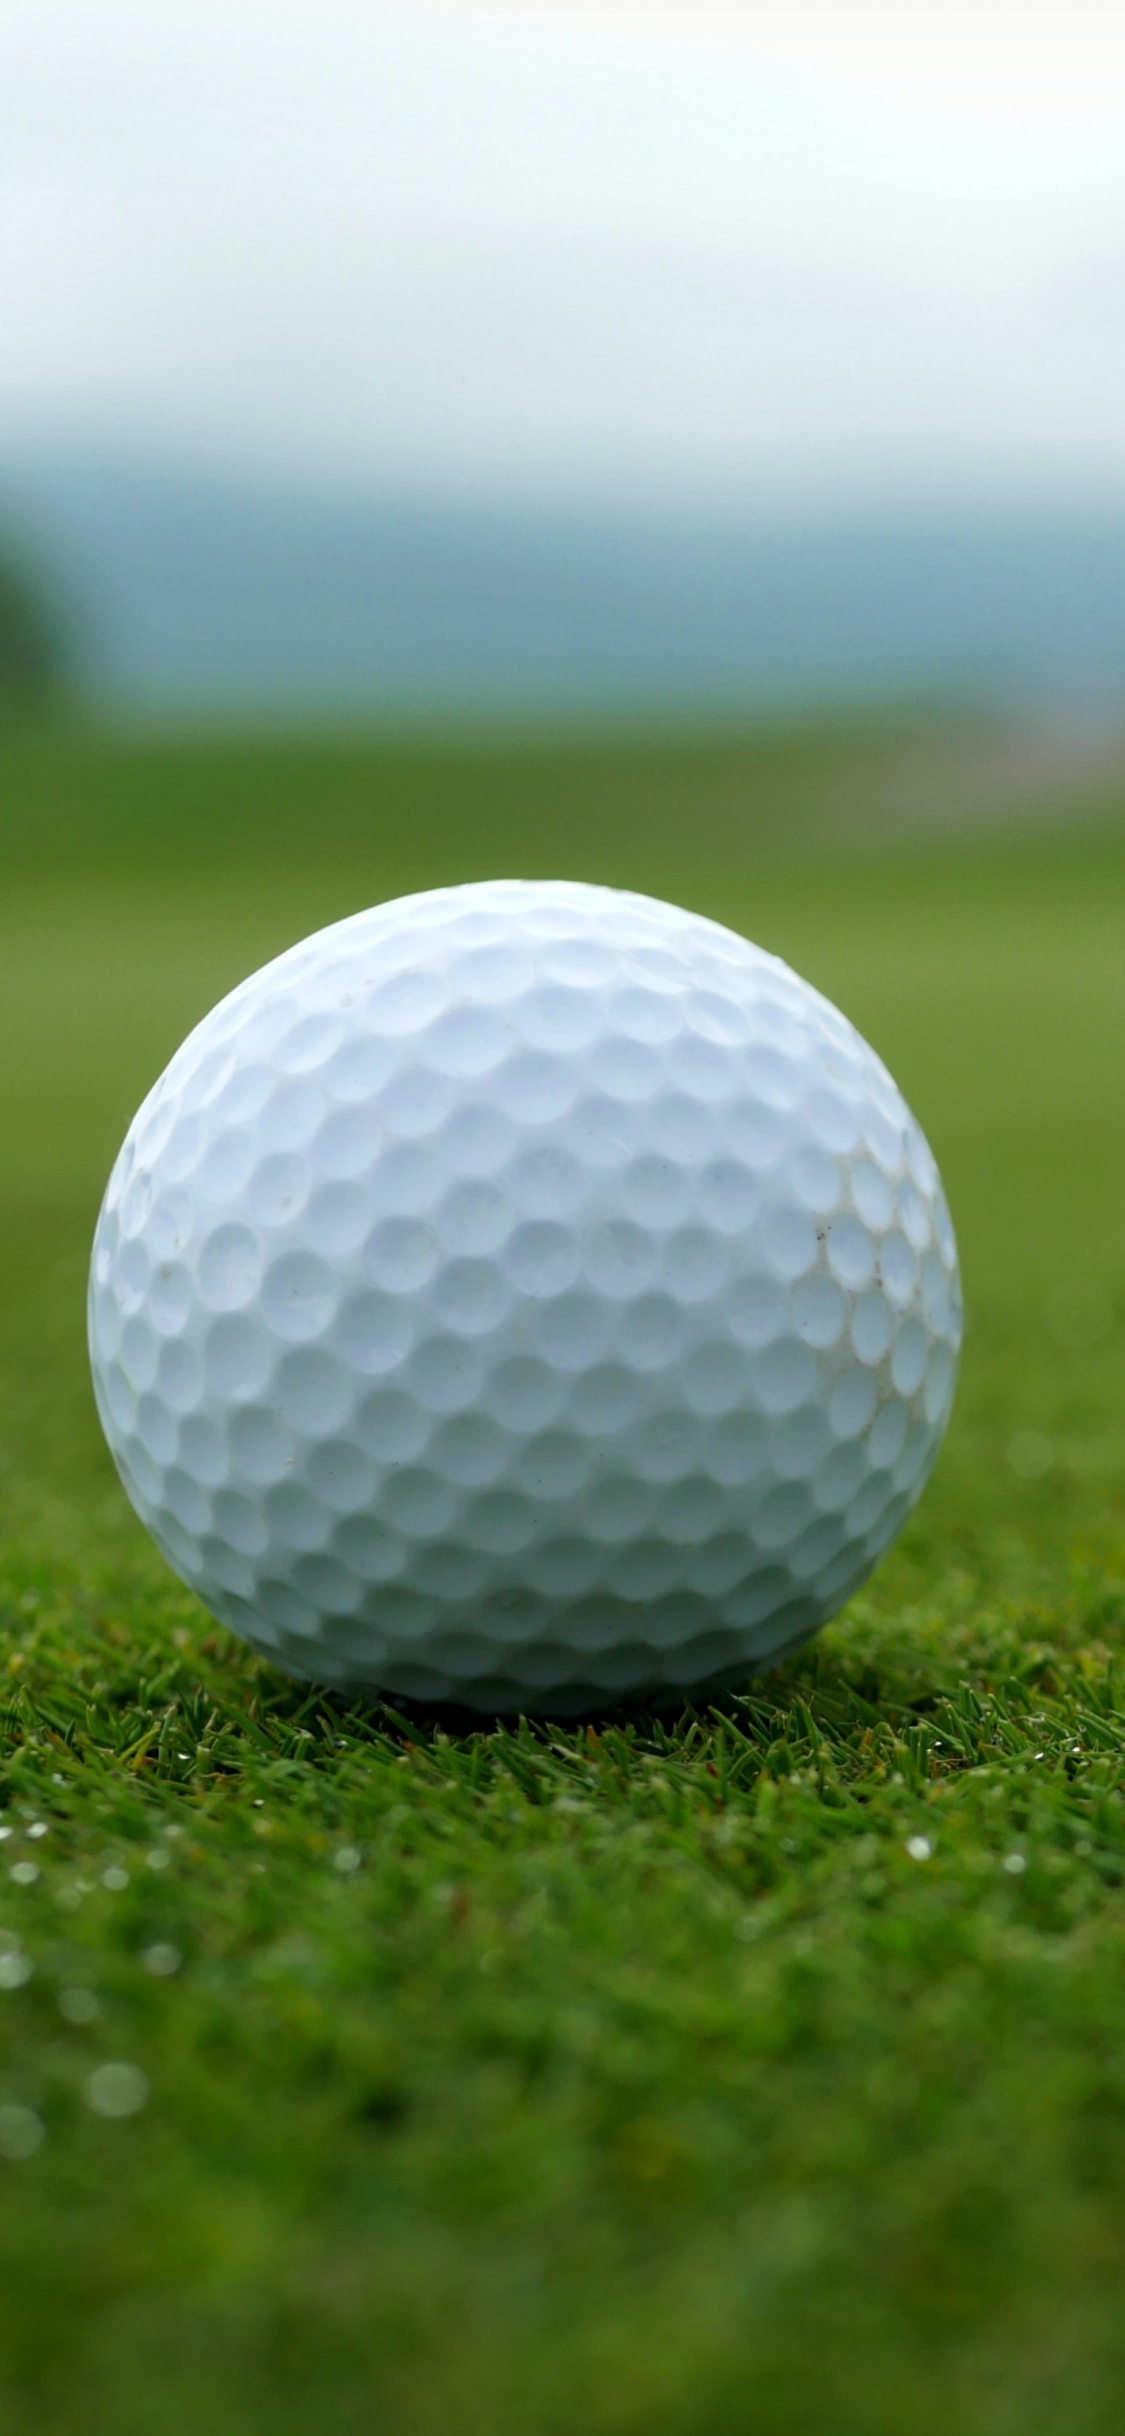 Download wallpaper 1125x2436 golf ball, white, sports, iphone x, 1125x2436  hd background, 24797